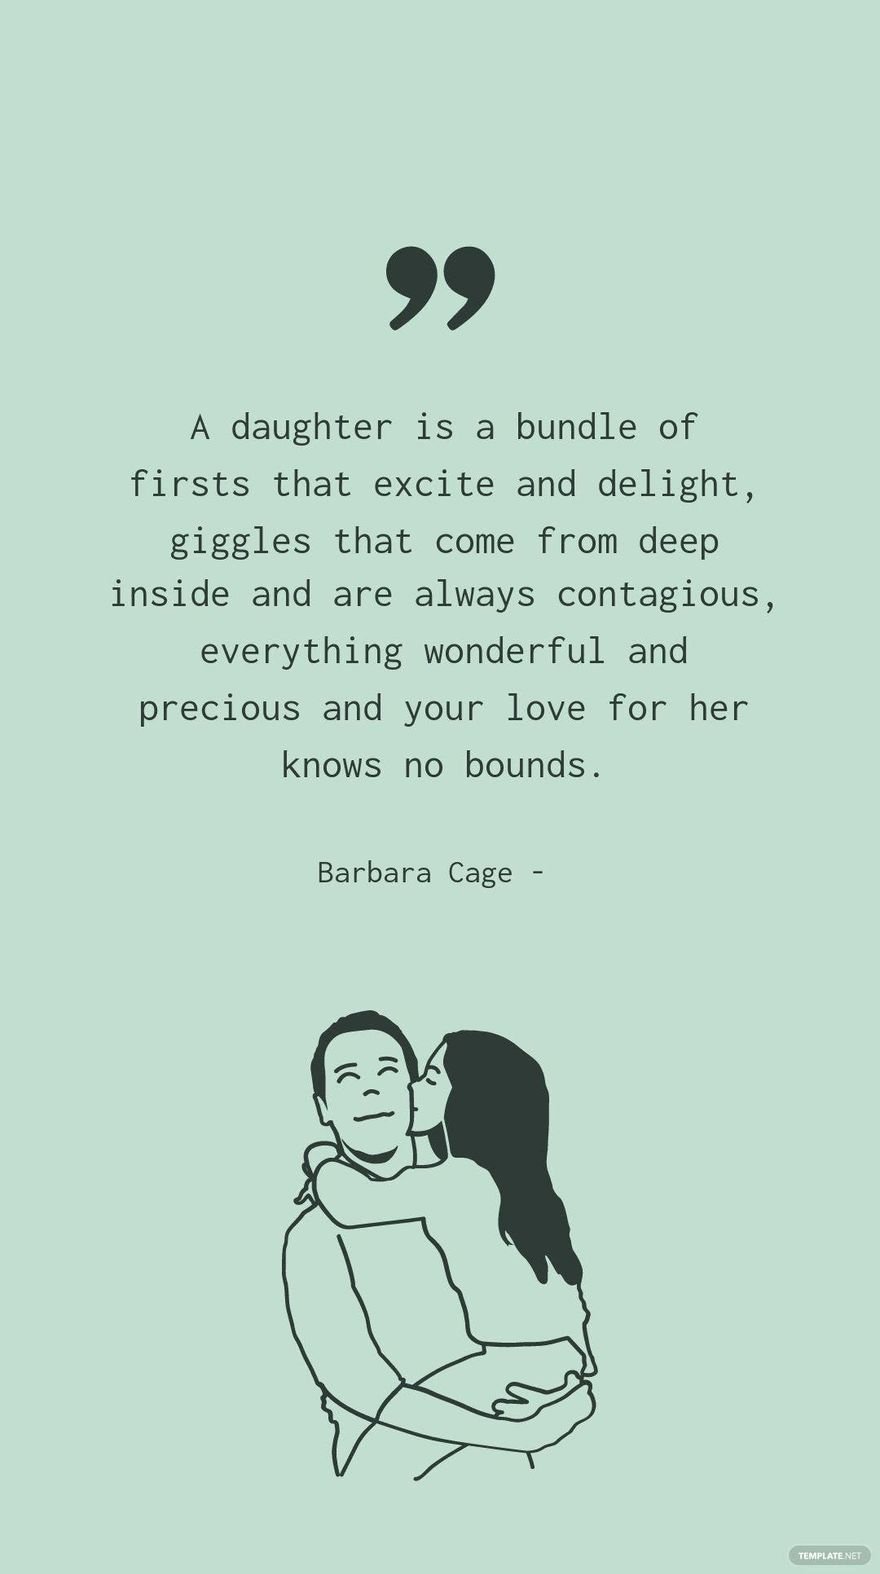 BARBARA CAGE -" A daughter is a bundle of firsts that excite and delight, giggles that come from deep inside and are always contagious, everything wonderful and precious and your love for her knows no